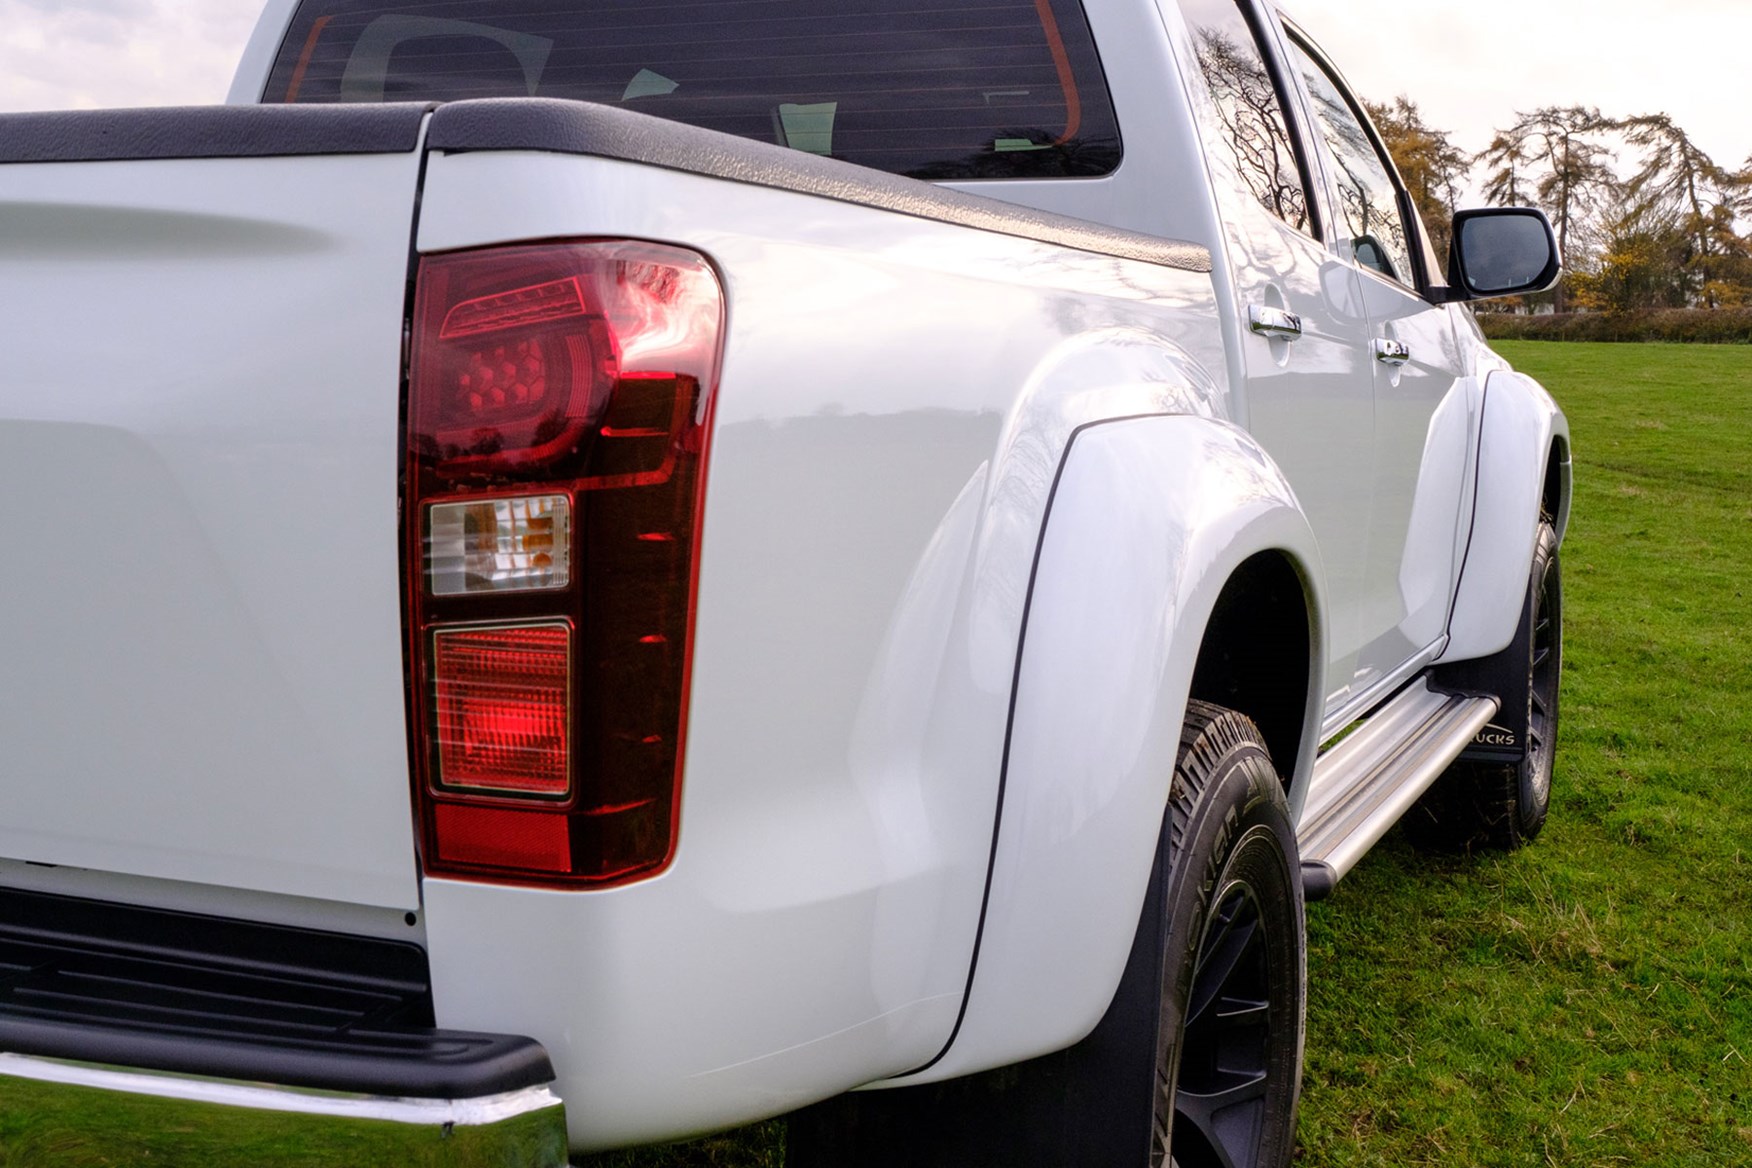 Isuzu D-Max AT35 1.9 review - rear view, close up, white